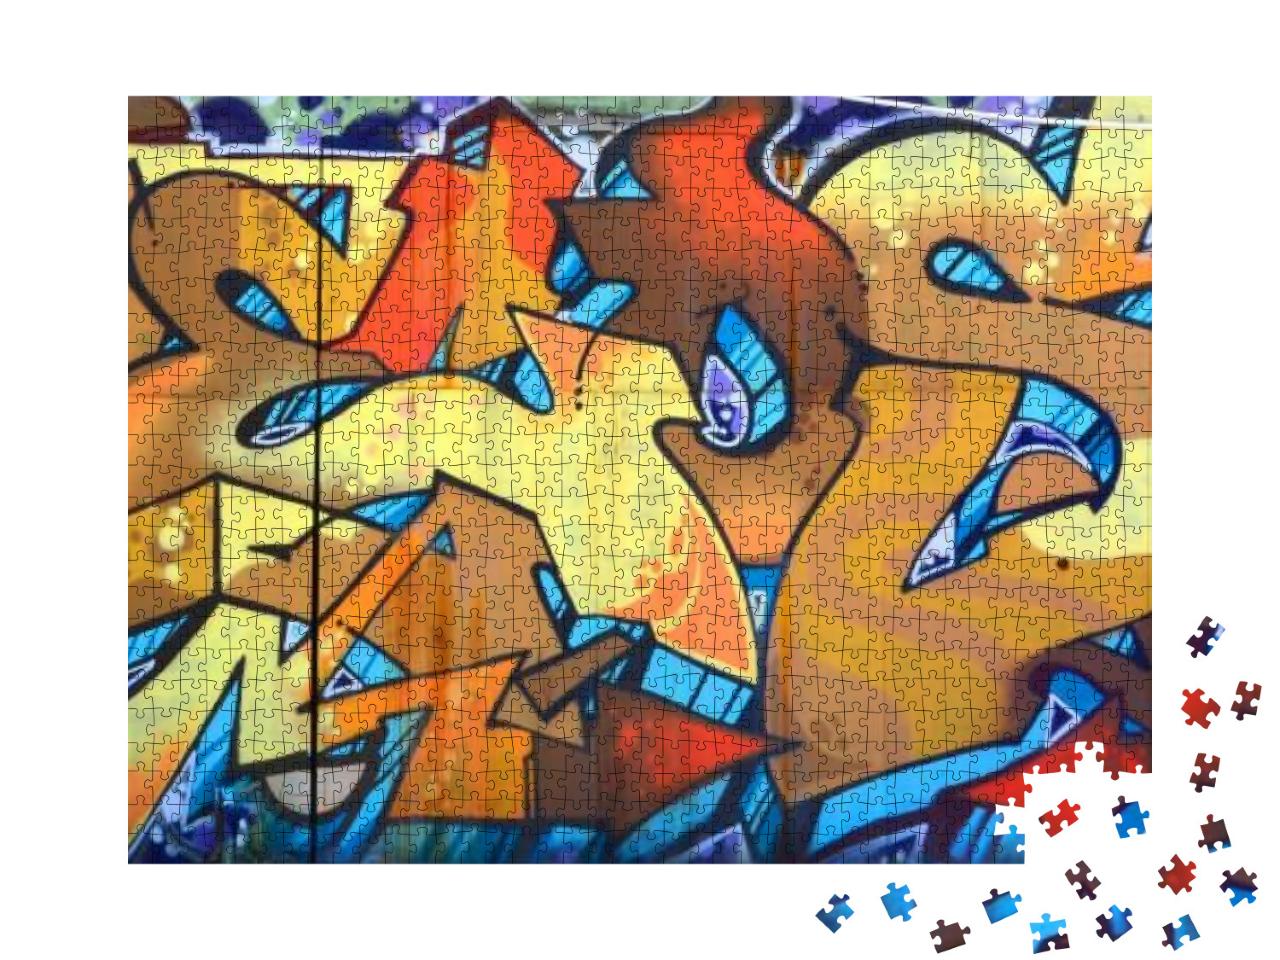 Street Art. Abstract Background Image of a Full Completed... Jigsaw Puzzle with 1000 pieces